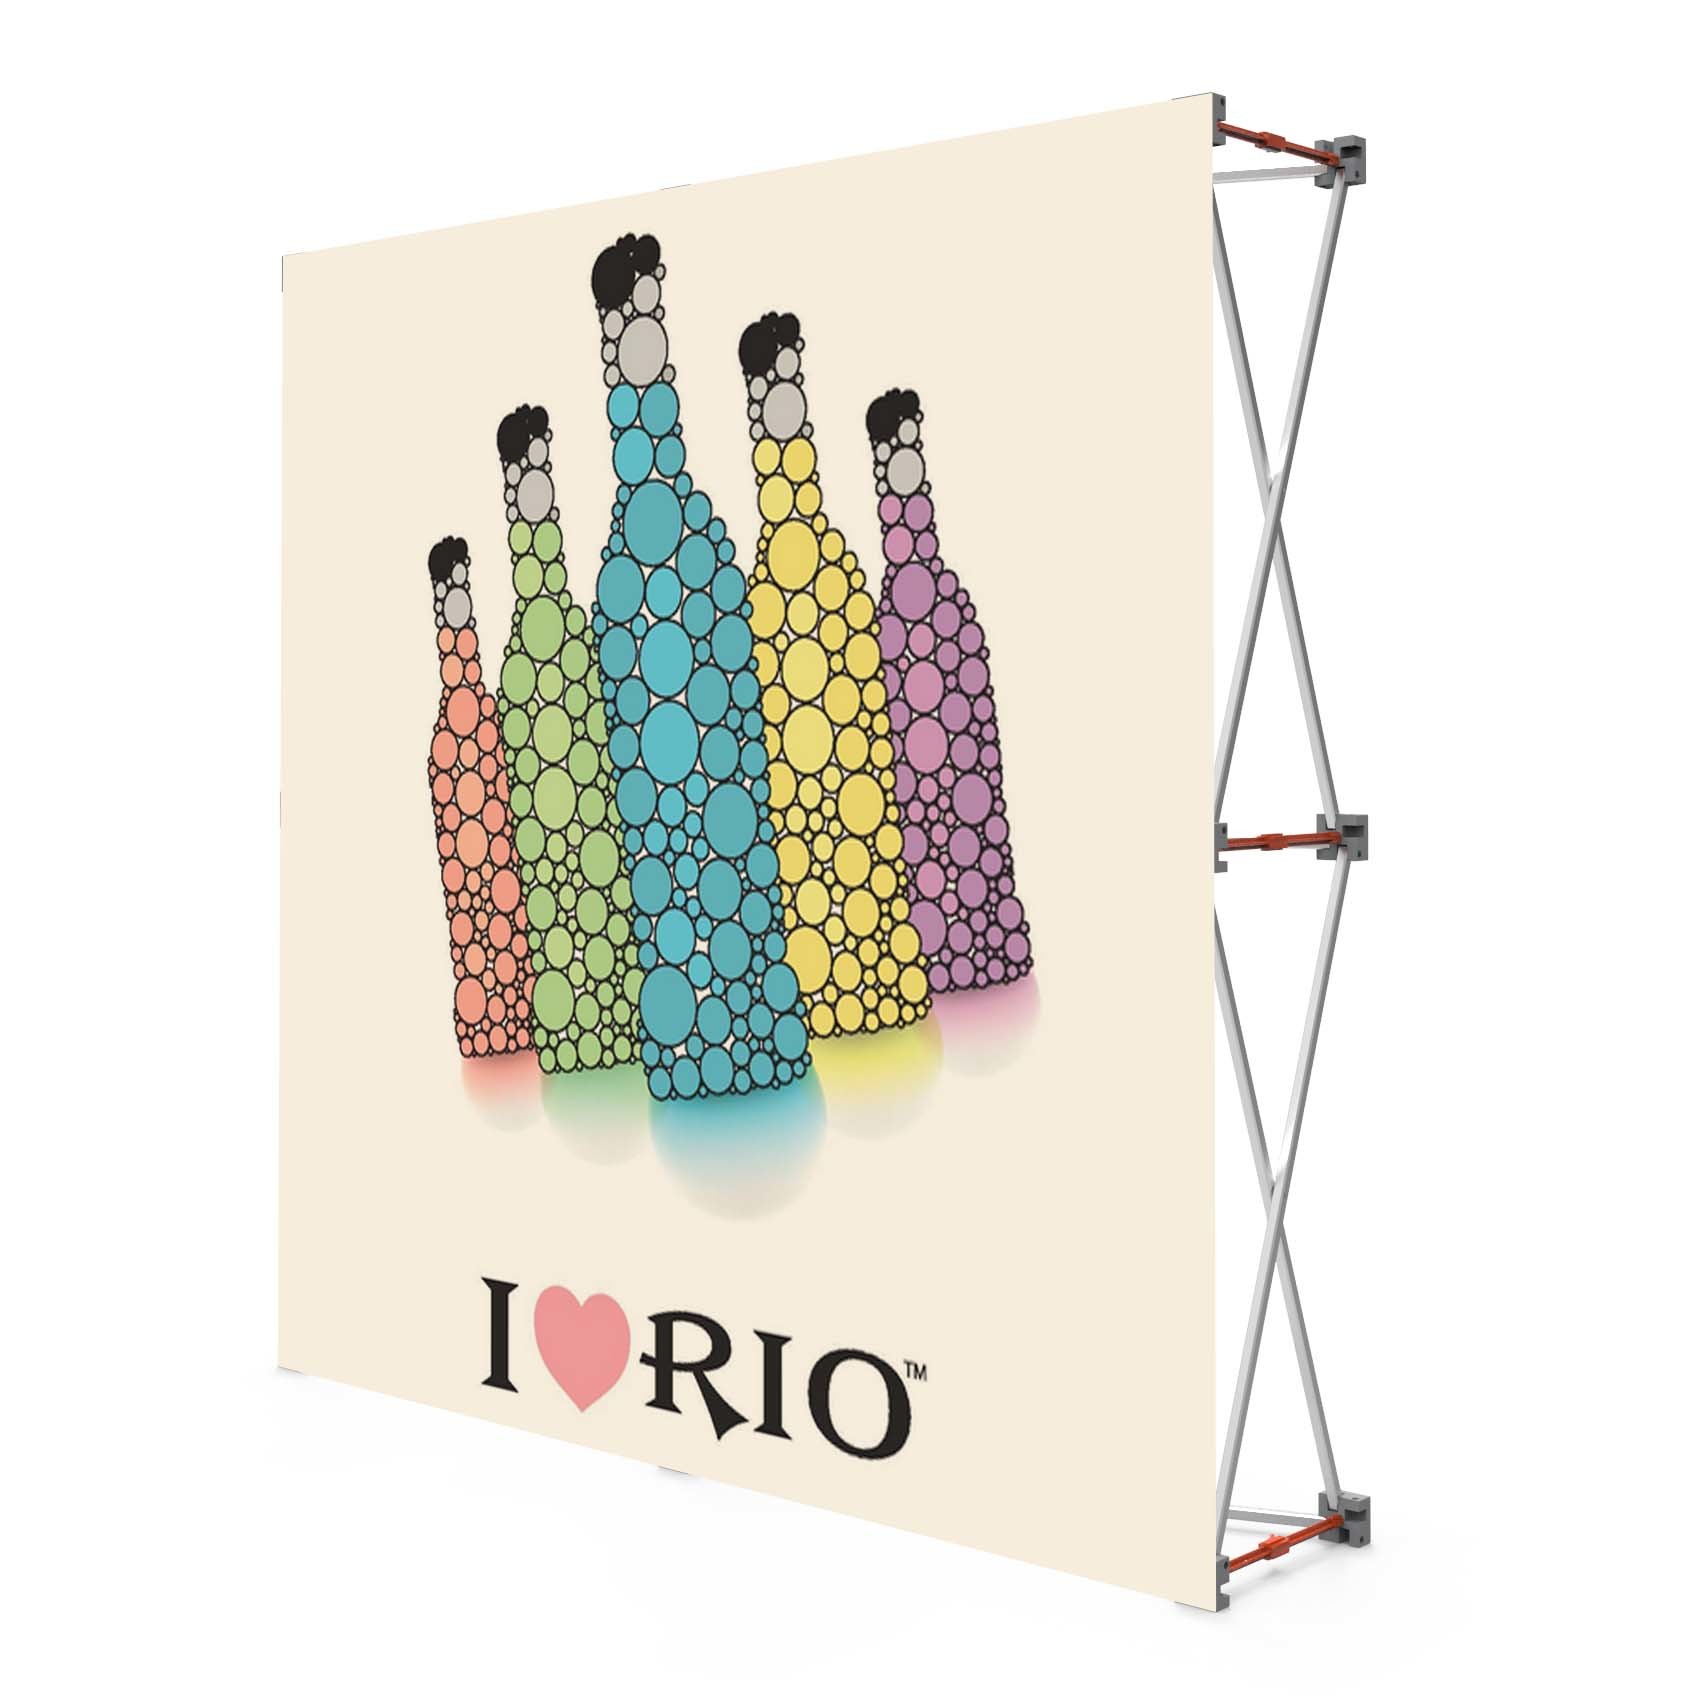  Fabric Portable Pull Up Display Banners , 2 * 2 Roll Up Display Stands Manufactures